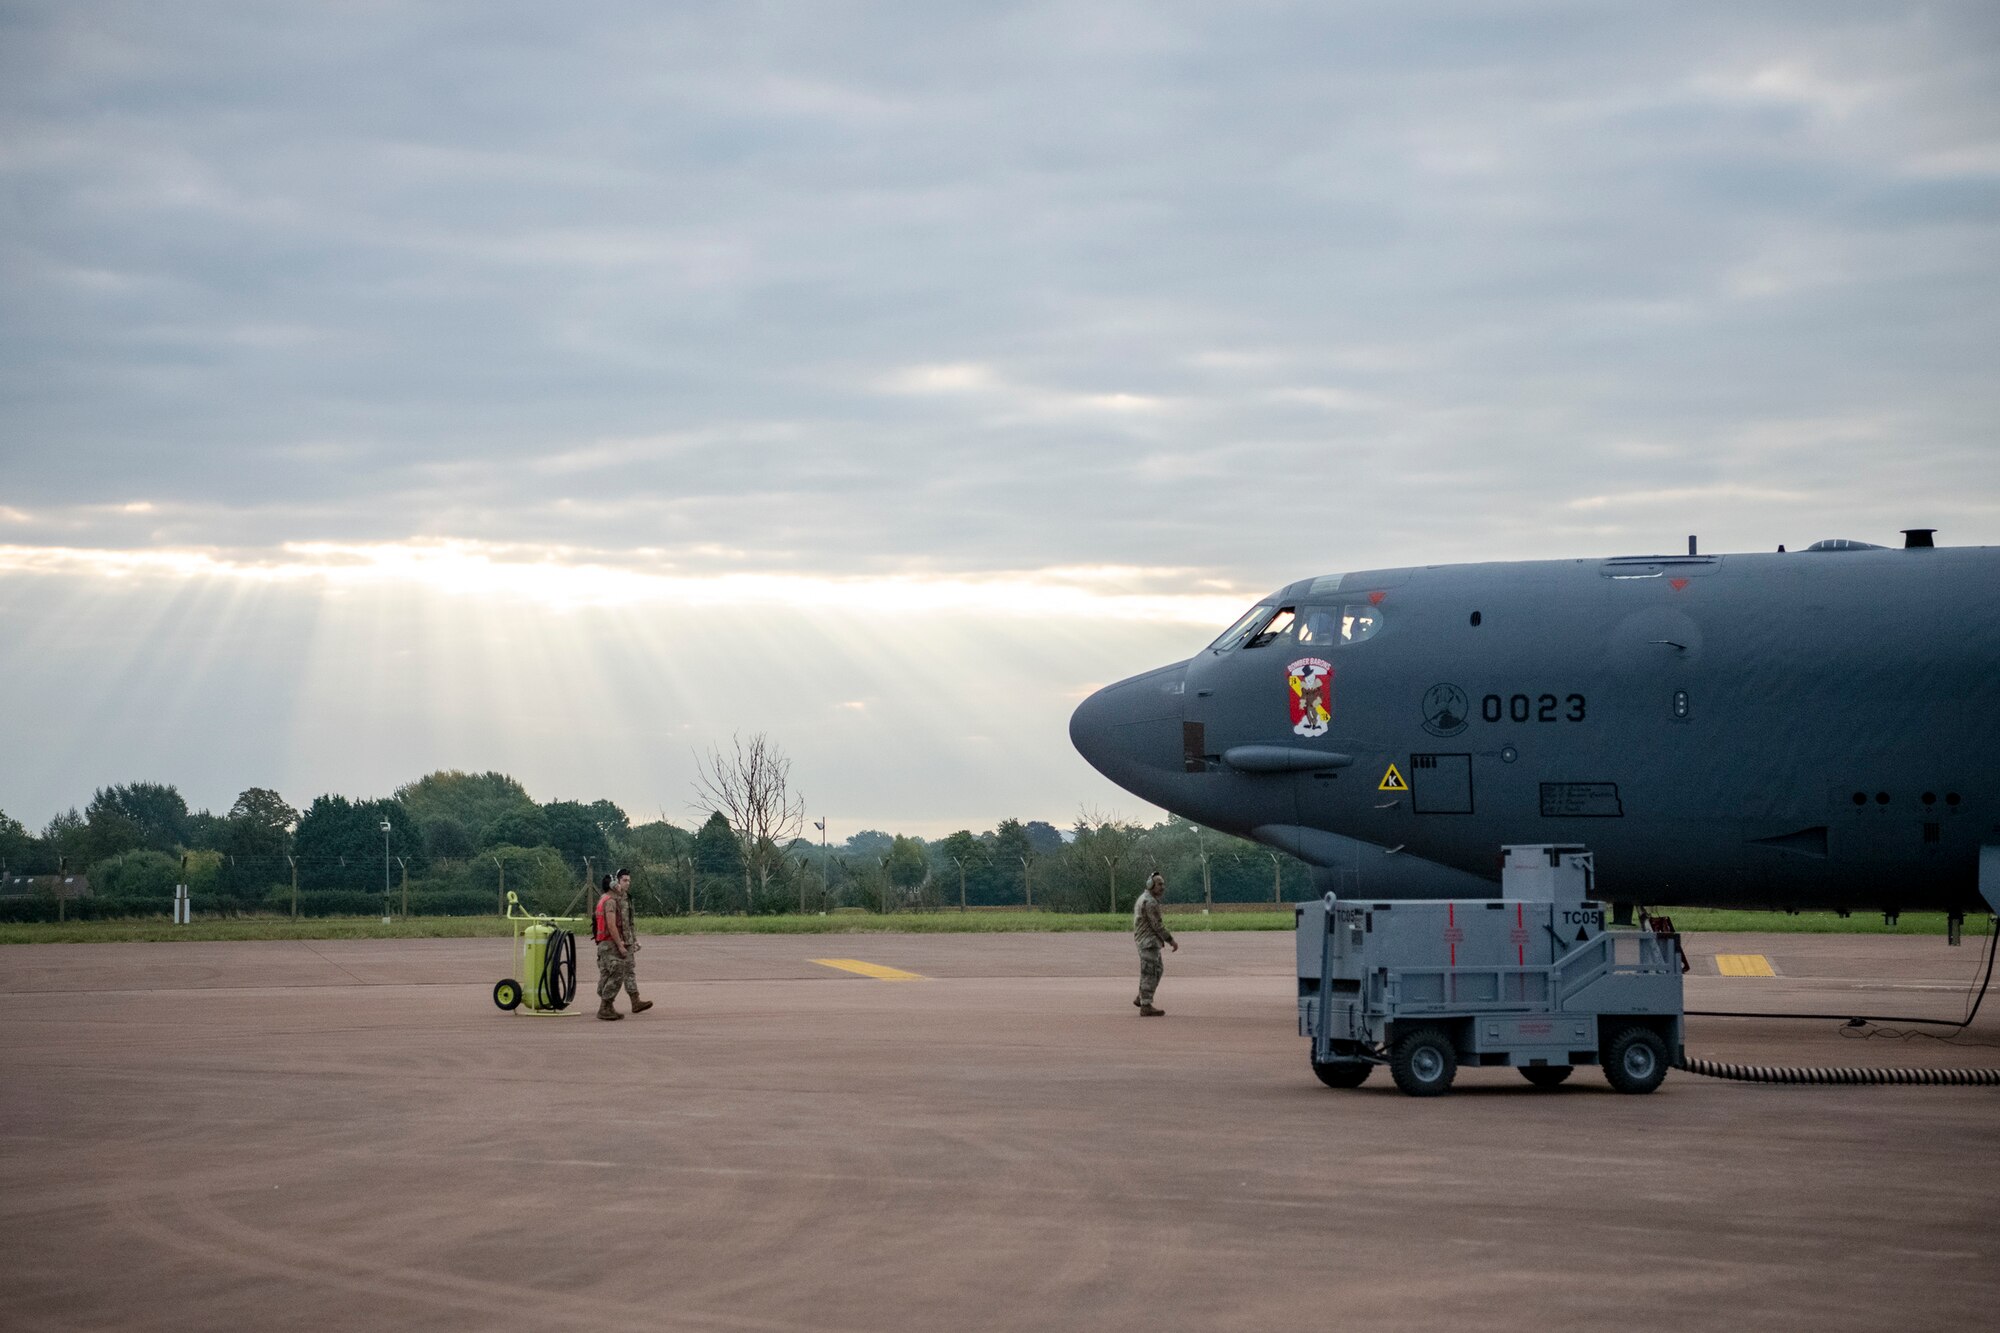 Airmen prep a B-52 Stratofortress aircraft assigned to the 23rd Expeditionary Bomb Squadron for takeoff at RAF Fairford, United Kingdom, Sept. 21, 2022. Strategic bombers contribute to stability in the European theater, they provide a critical role in strategic deterrence. If called upon, U.S. bombers offer a rapid response capability. (U.S. Air Force photo by Staff Sgt. Eugene Oliver)